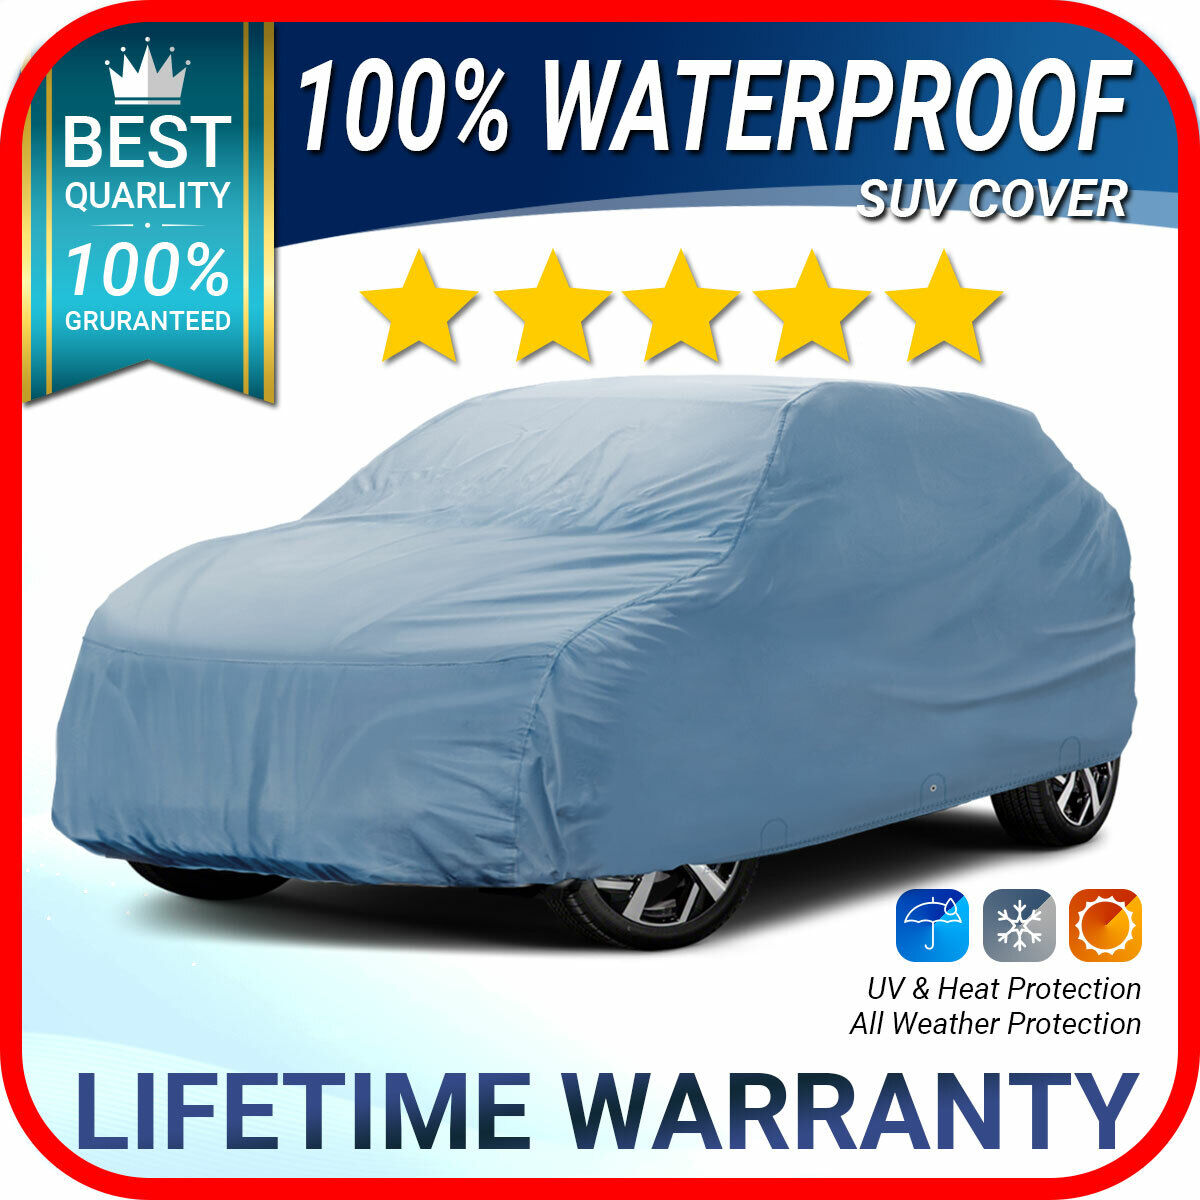 [CHEVY SUBURBAN] 100% Waterproof / All Weather Full Warranty SUV Car Cover